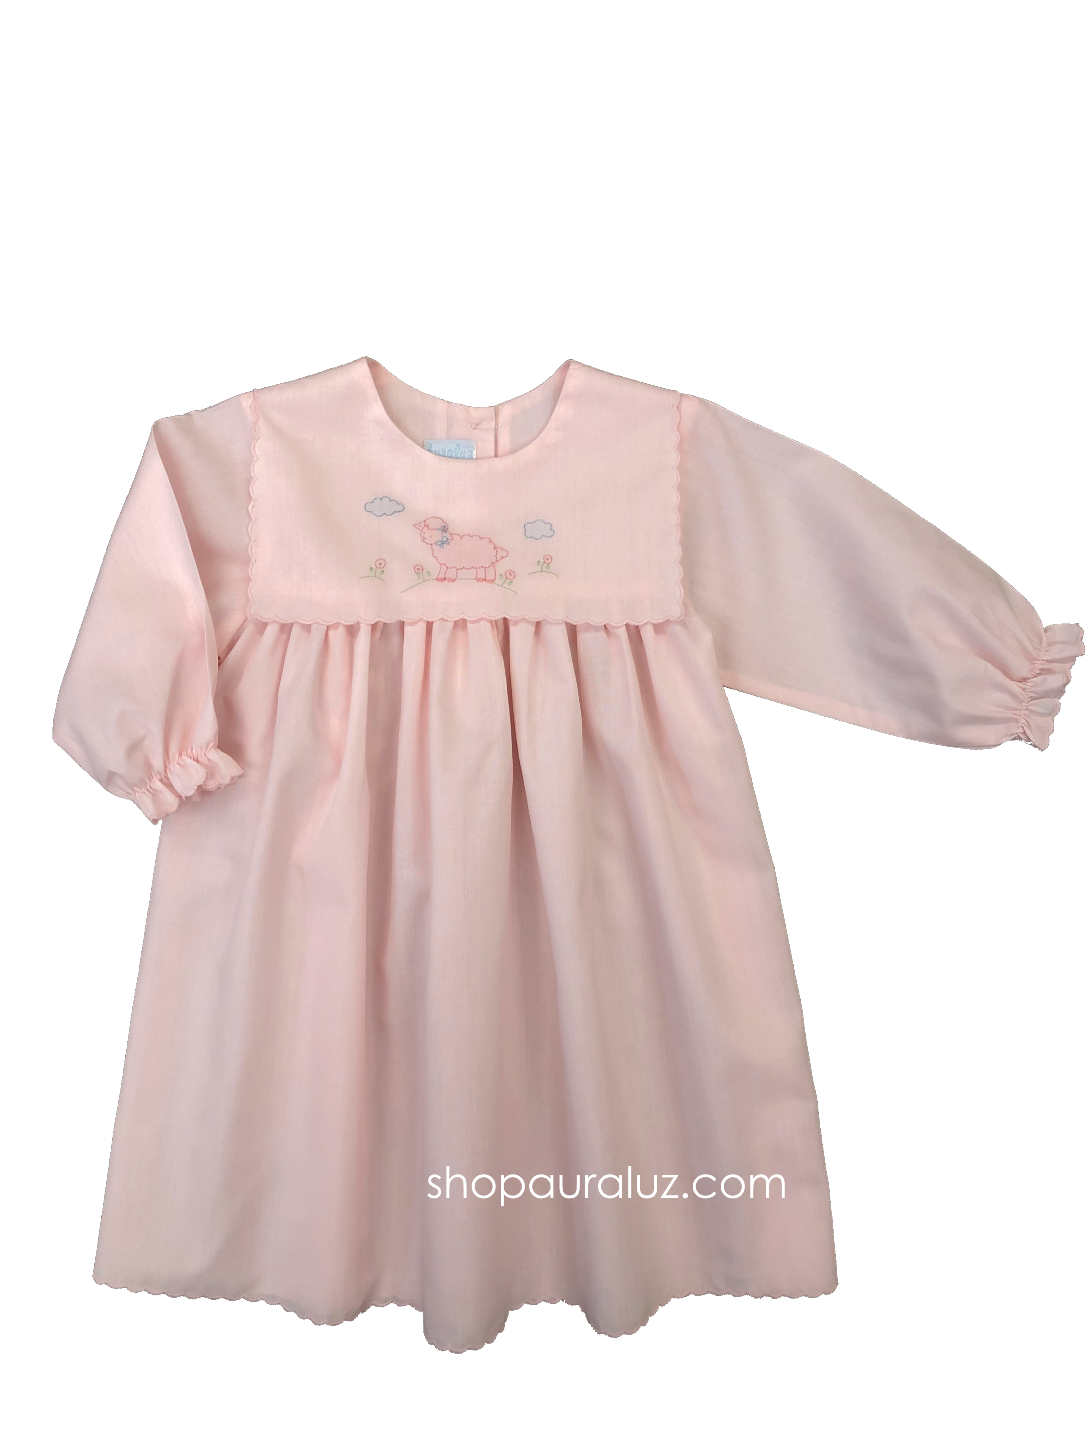 Auraluz Dress, l/s...Pink with square collar,scallop trim and embroidered lamb